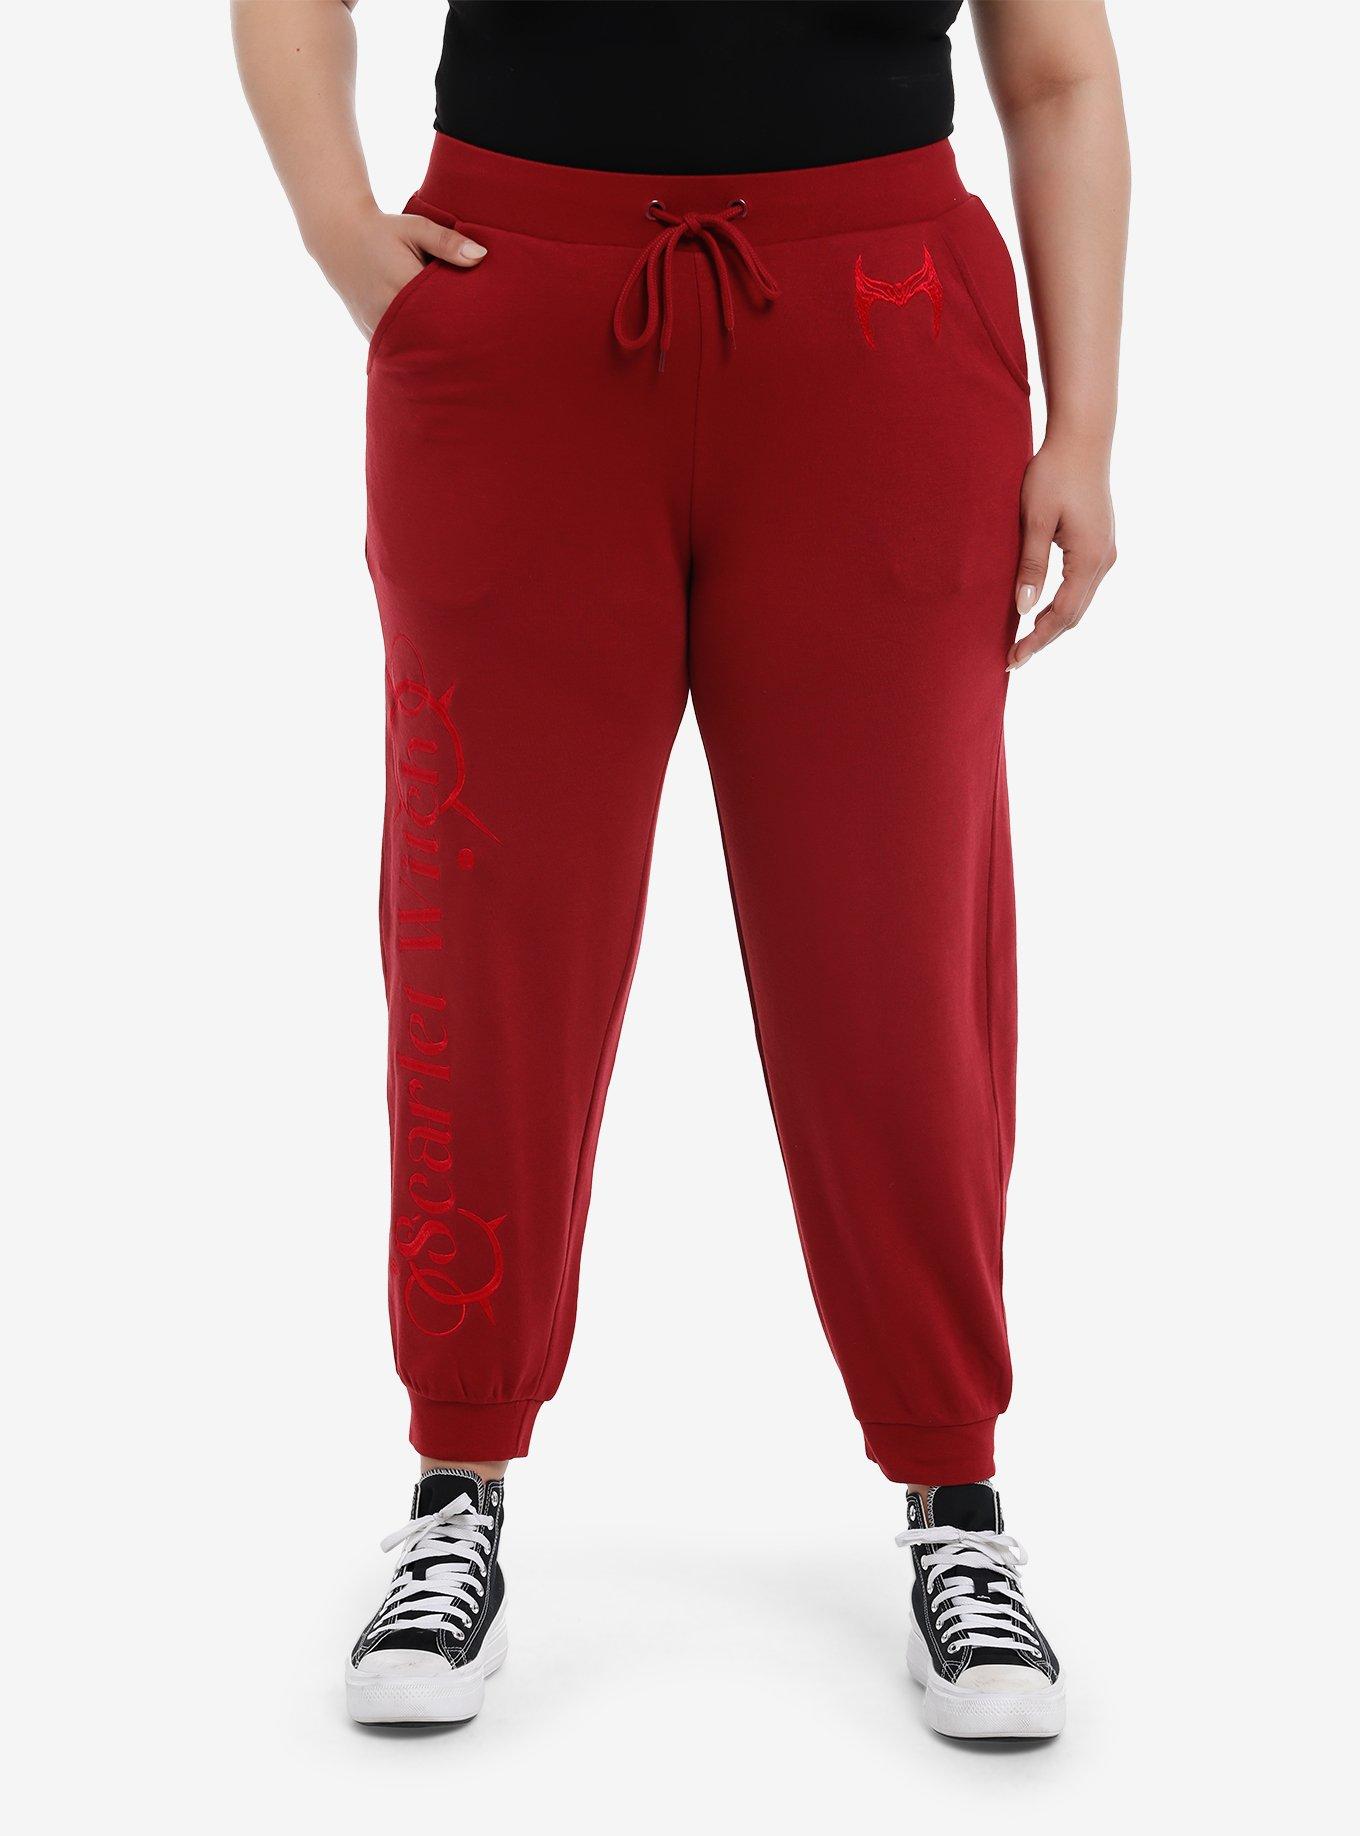 Her Universe Marvel Scarlet Witch Tiara Jogger Pants Plus Size Her Universe Exclusive, BURGUNDY, hi-res